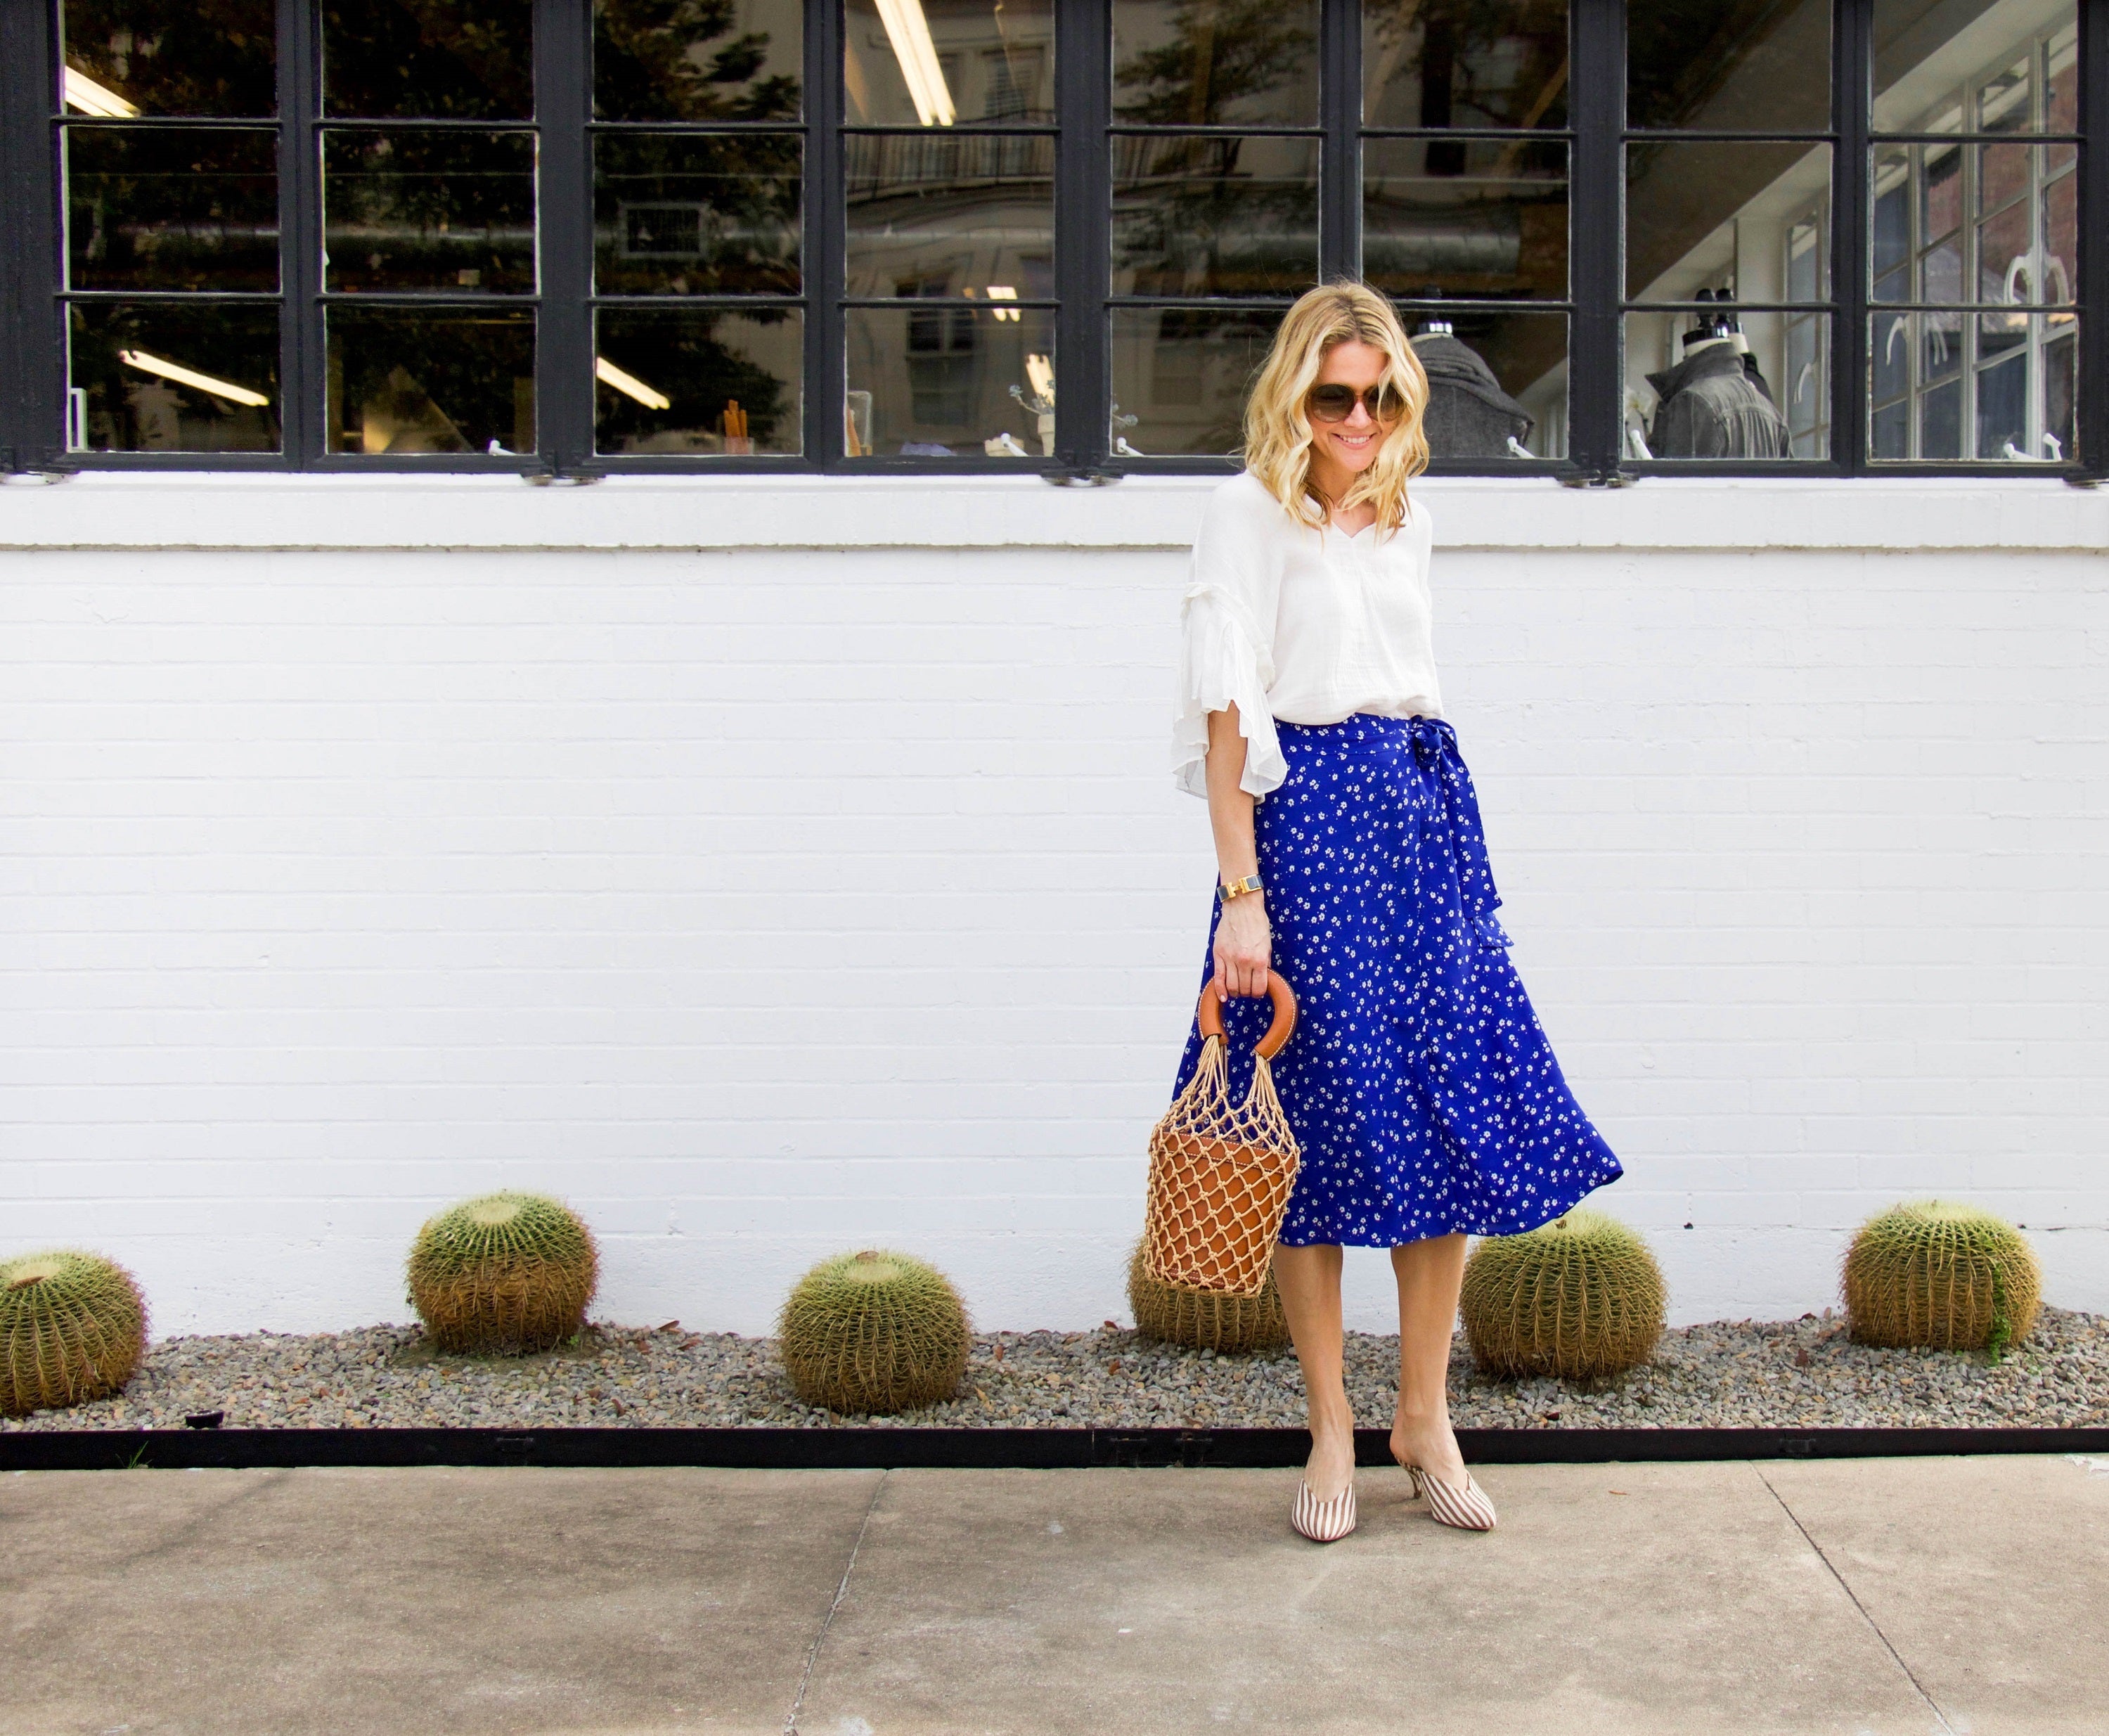 True Blue Midi Skirt & An Easy Blouse by Mirth With Spring Accessory Staples